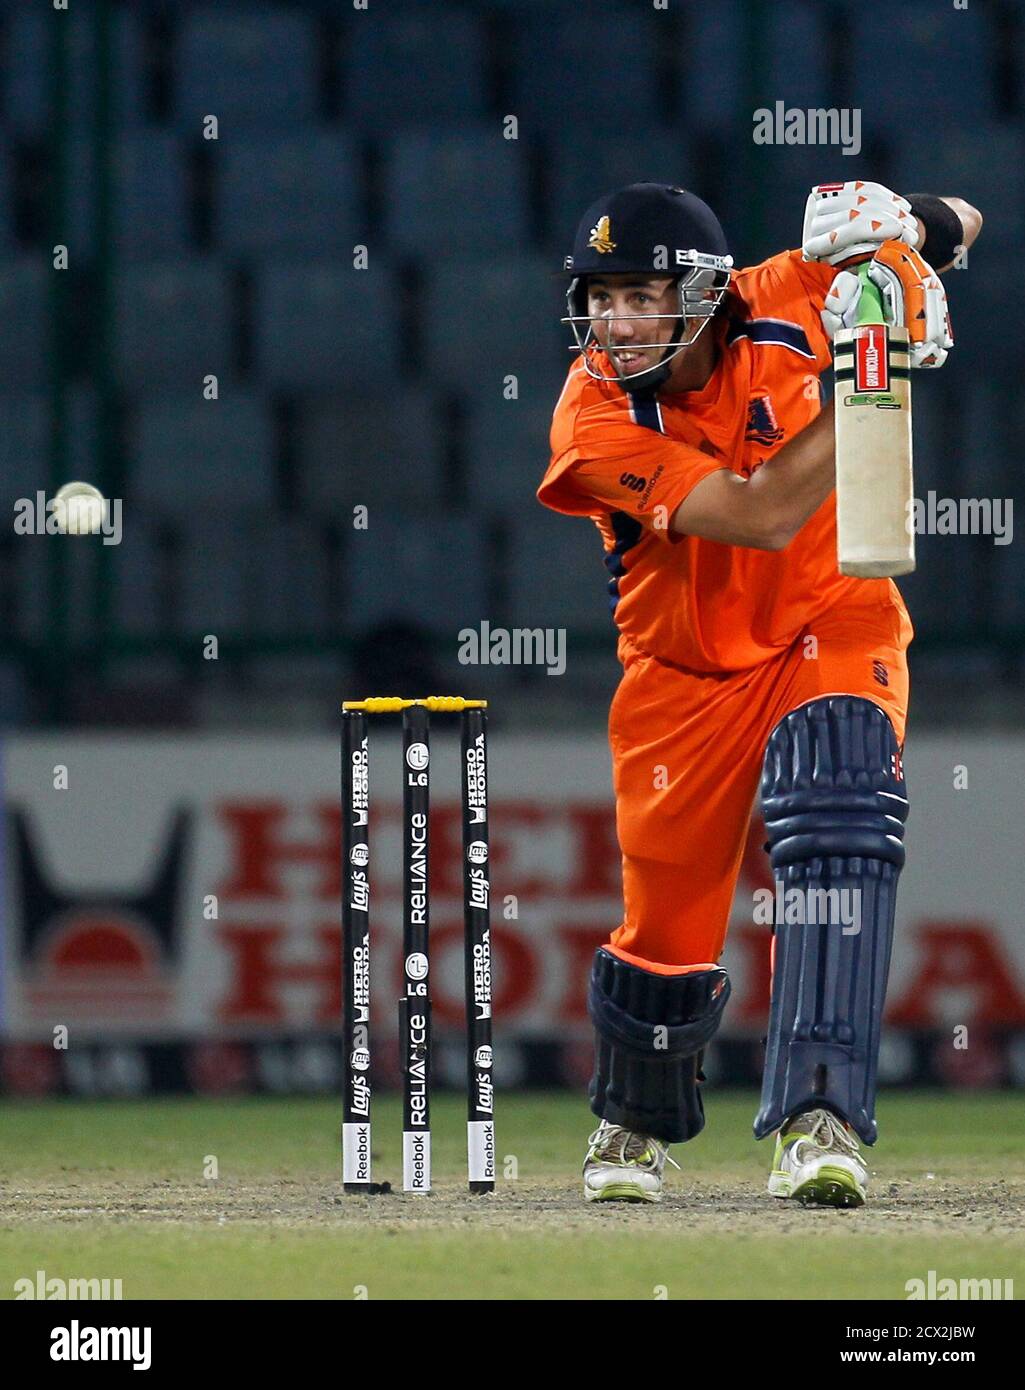 Netherlands' Tom Cooper plays a shot during their ICC Cricket World Cup  group B match against the West Indies in New Delhi February 28, 2011.  REUTERS/Adnan Abidi (INDIA - Tags: SPORT CRICKET